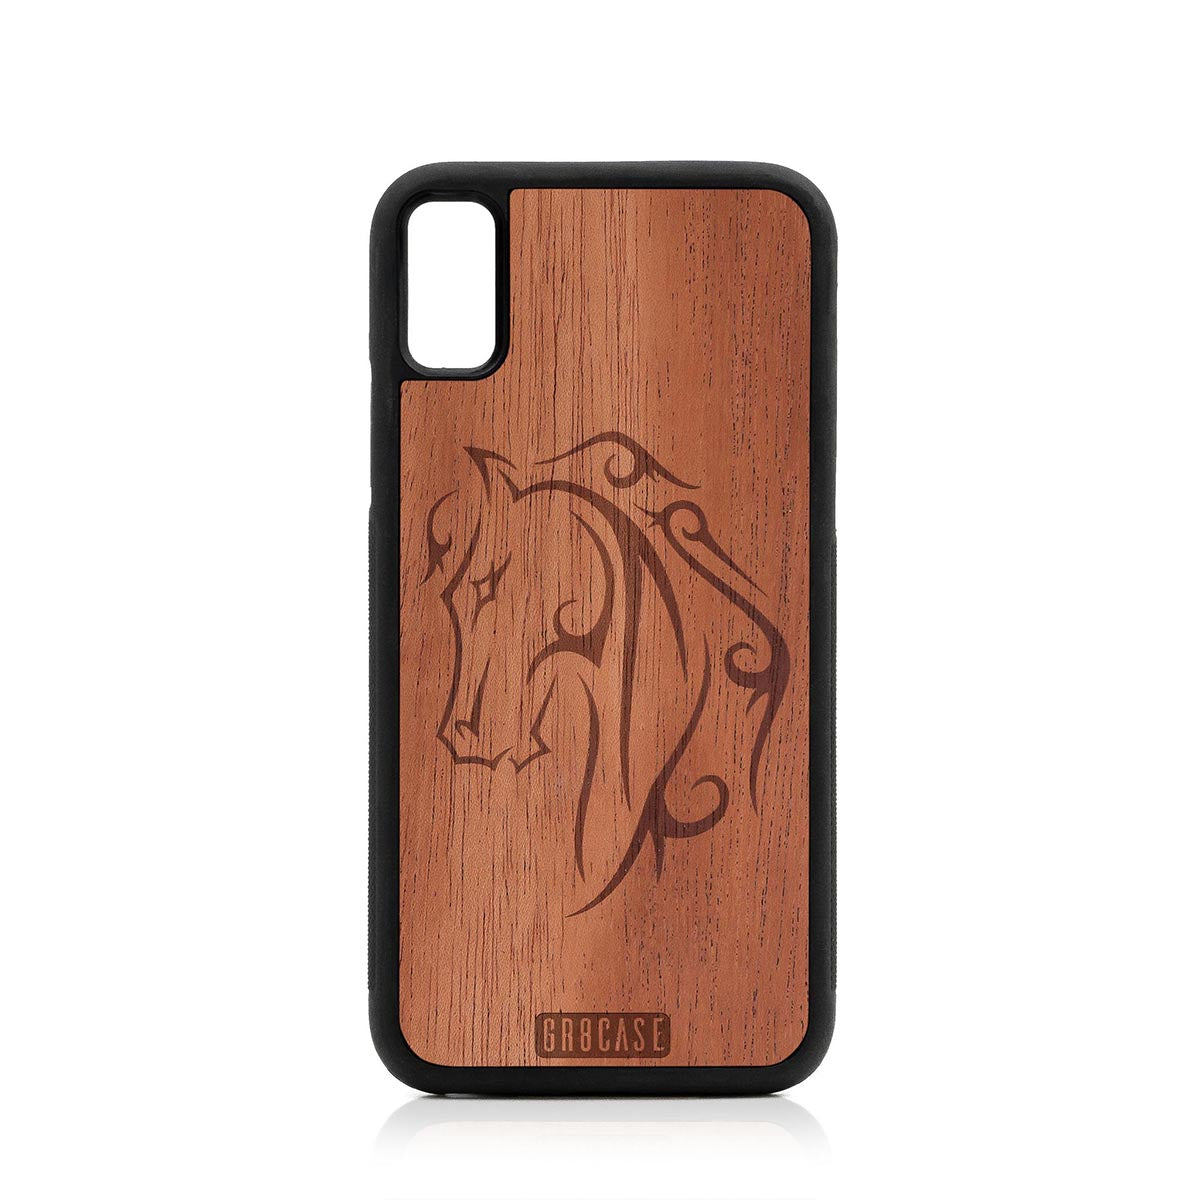 Horse Tattoo Design Wood Case For iPhone XS Max by GR8CASE